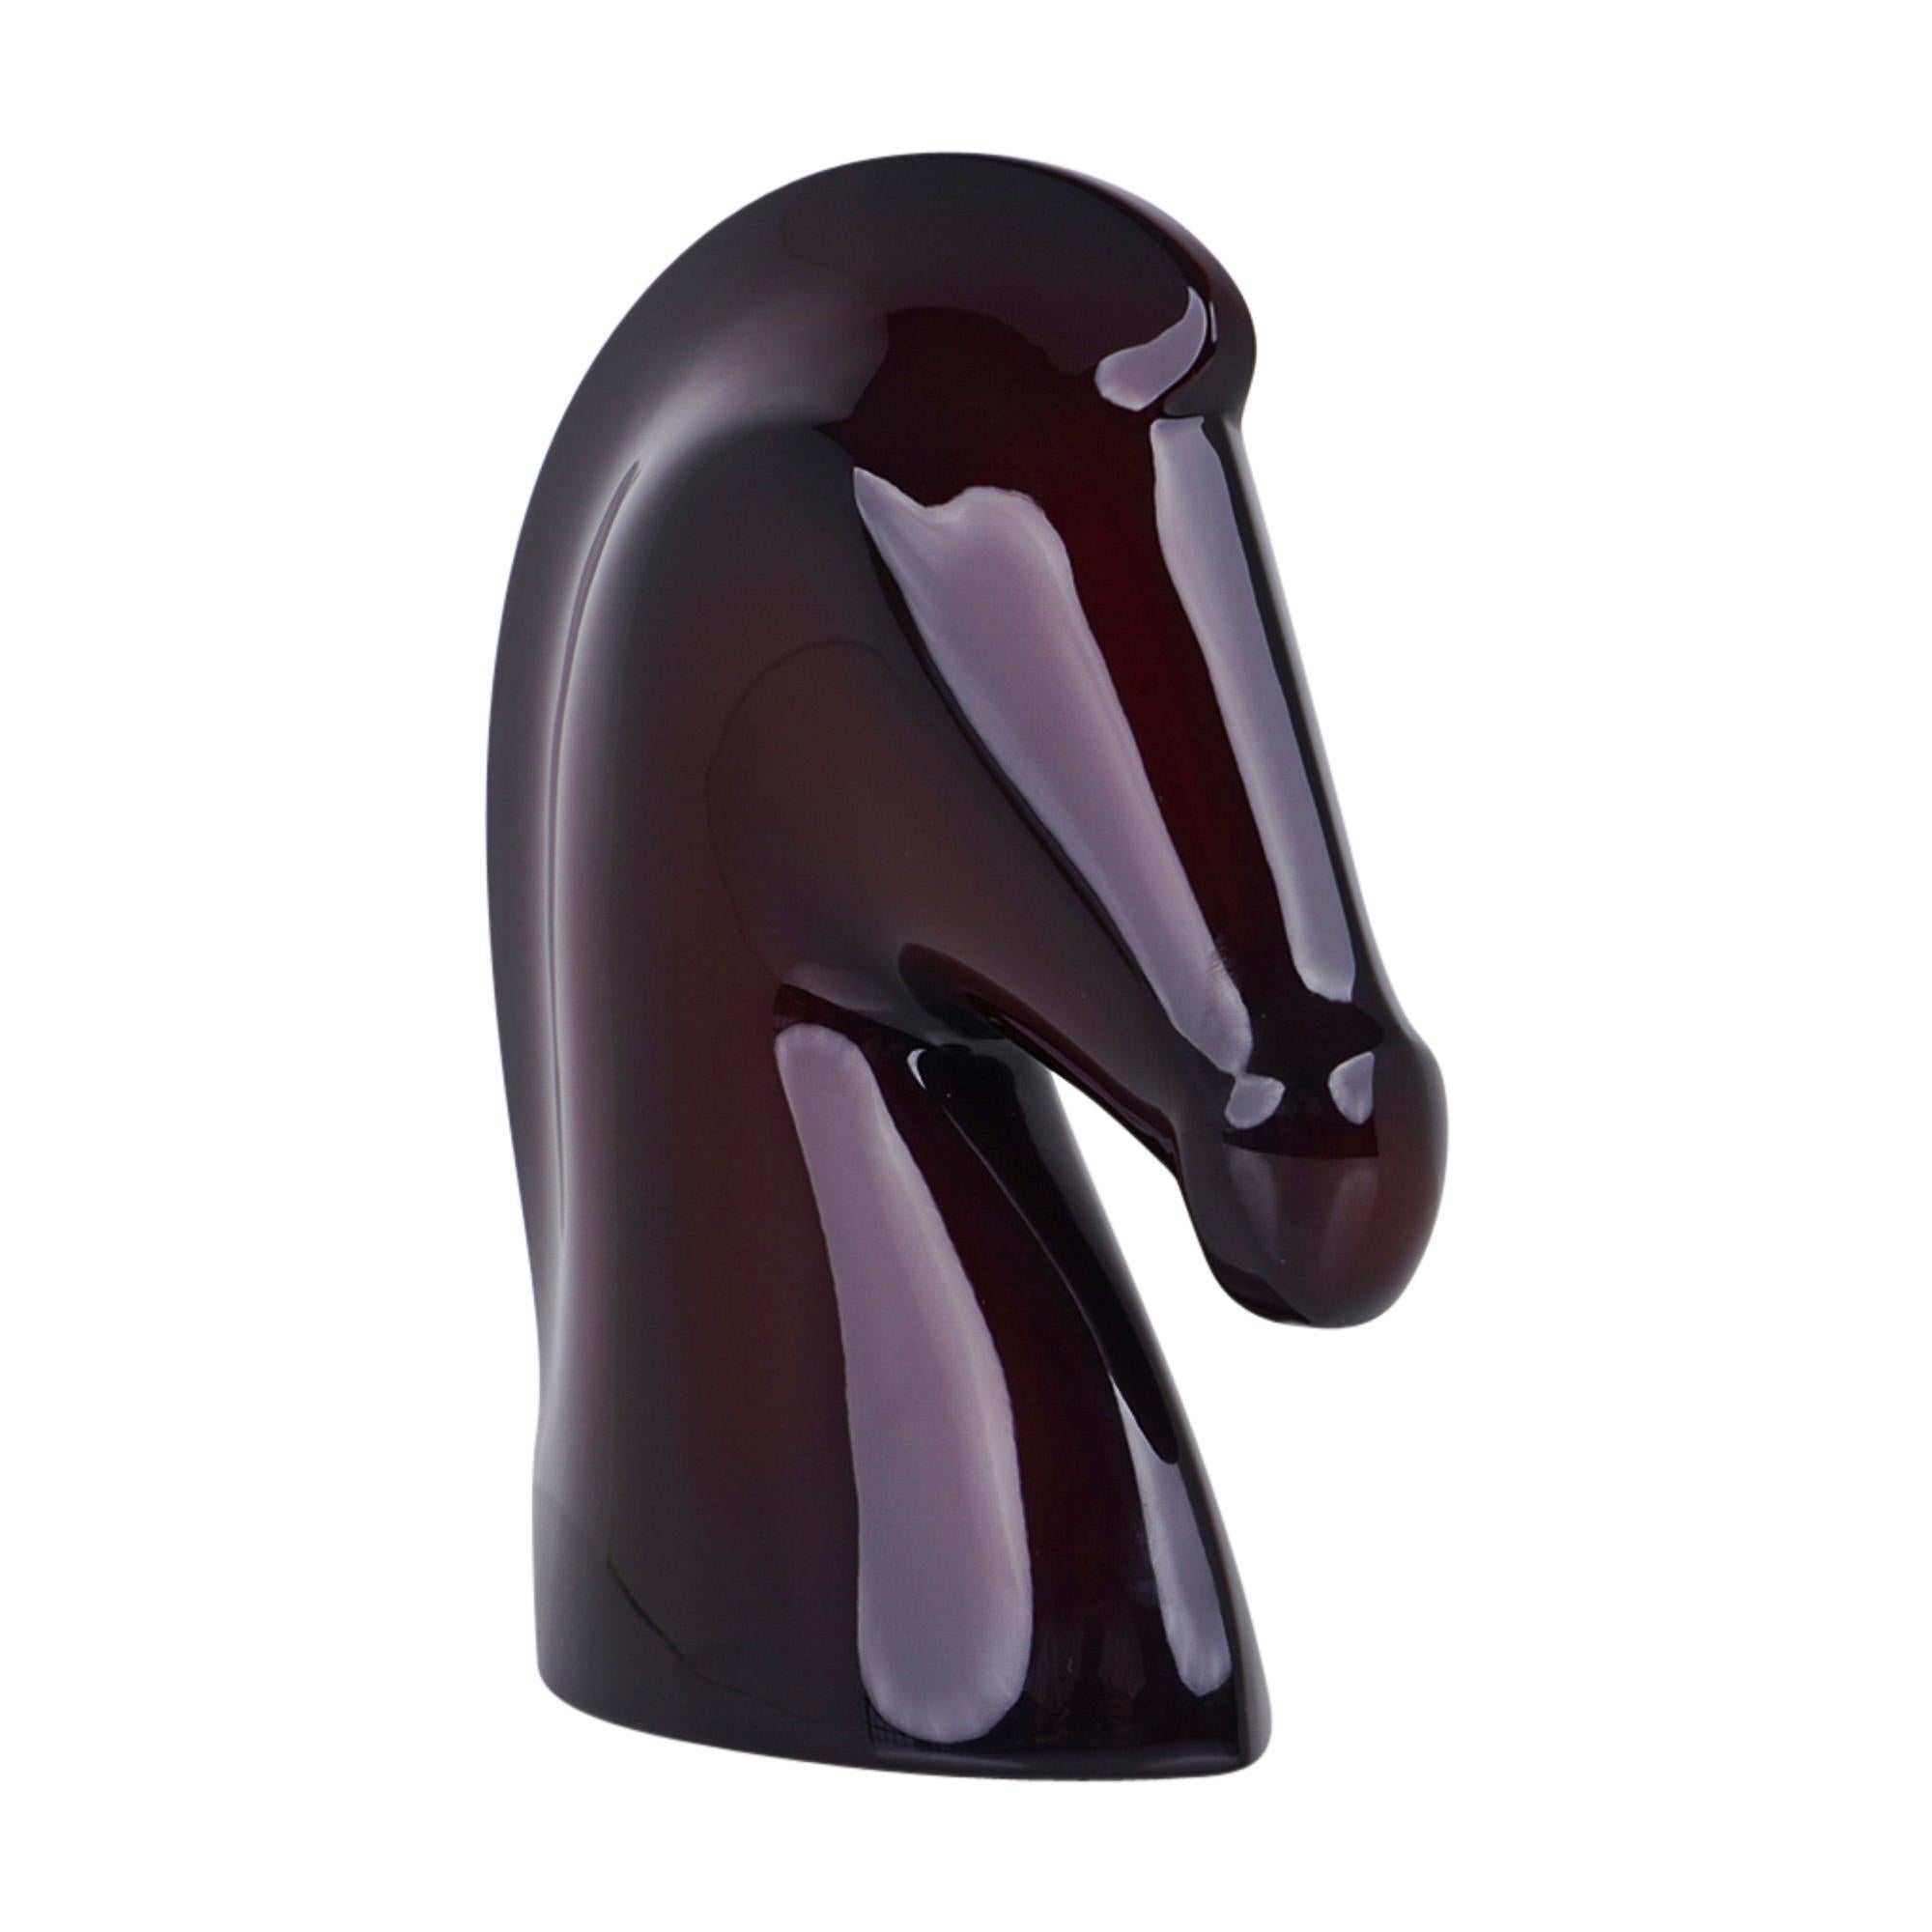 Guaranteed authentic Hermes Samarcnade paperweight featured in Aubergine laquered wood.
Crafted in layers of hand lacquered wood, and sanded to reveal the beauty of the colour.
This exquisite paperweight can serve as a stand alone.
Leather base